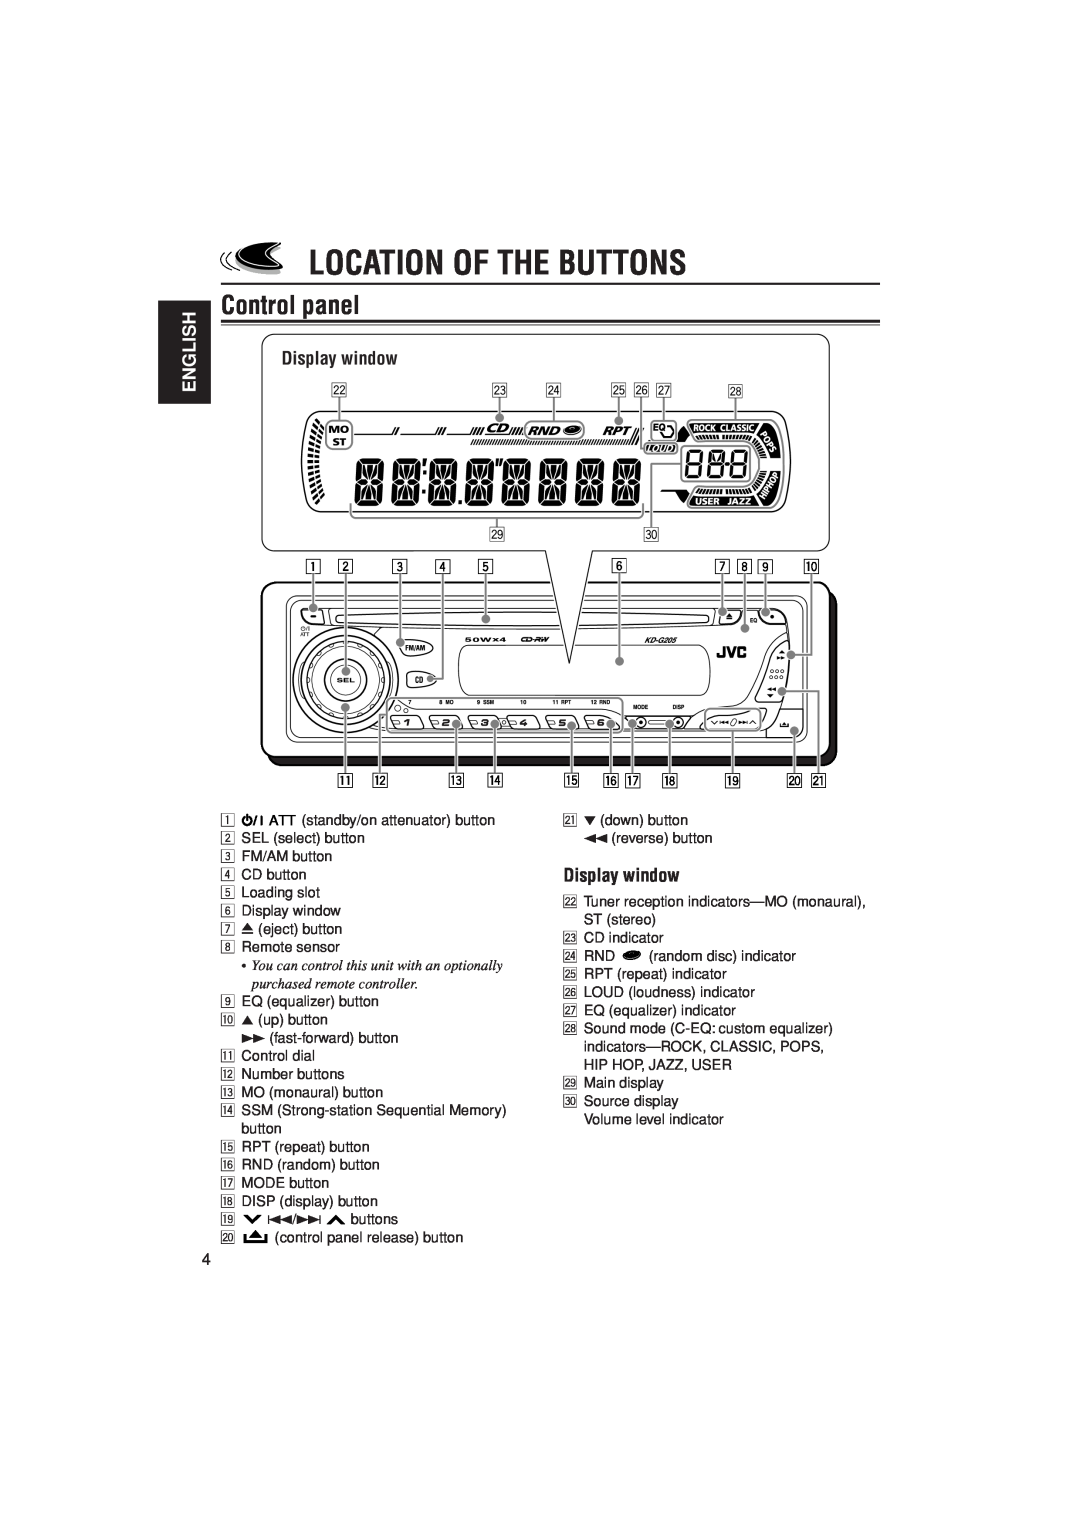 JVC KD-G205 manual Location Of The Buttons, Control panel, English, Display window 